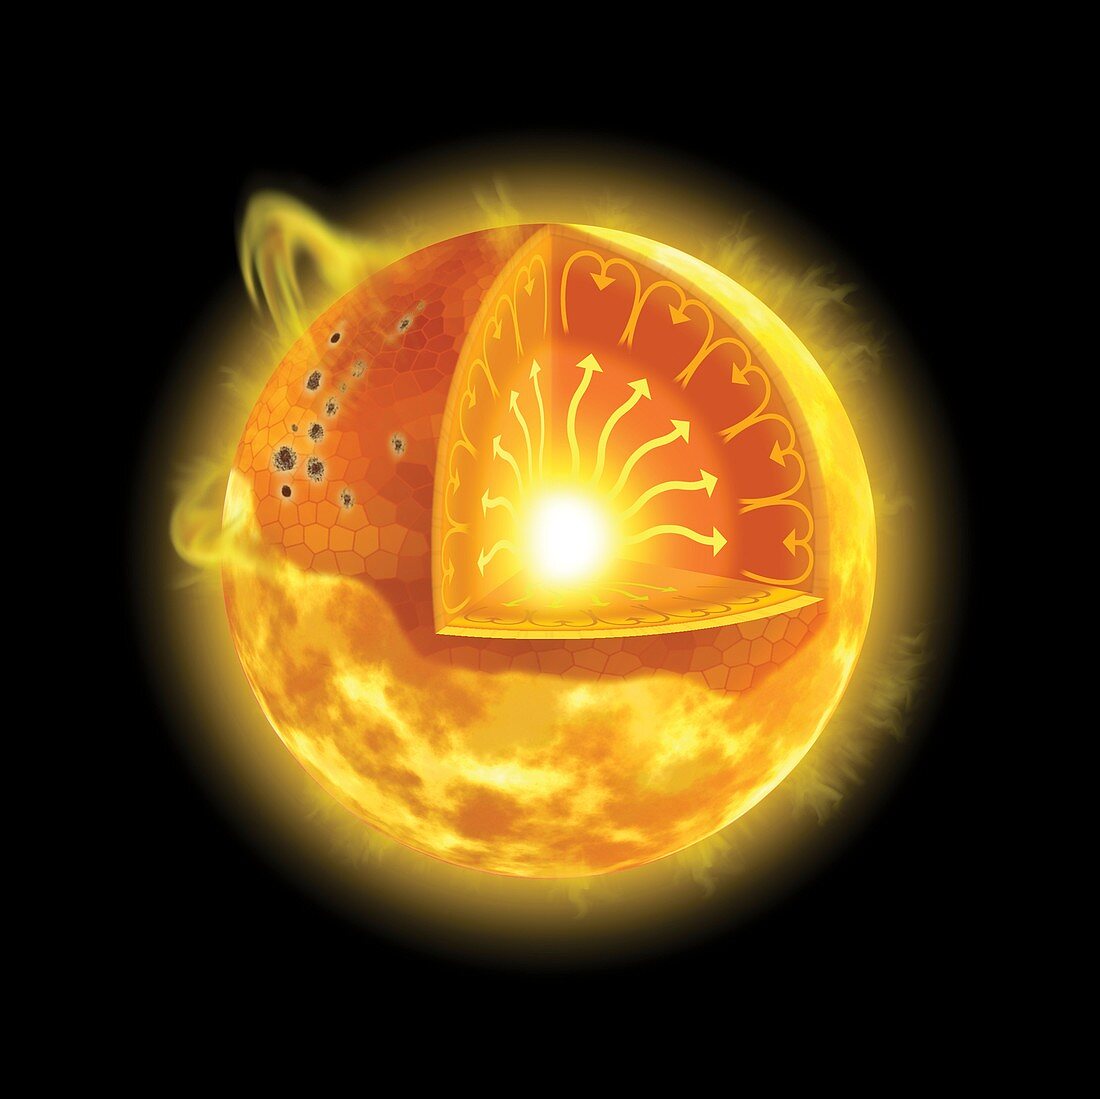 Internal and surface structure of the Sun, illustration